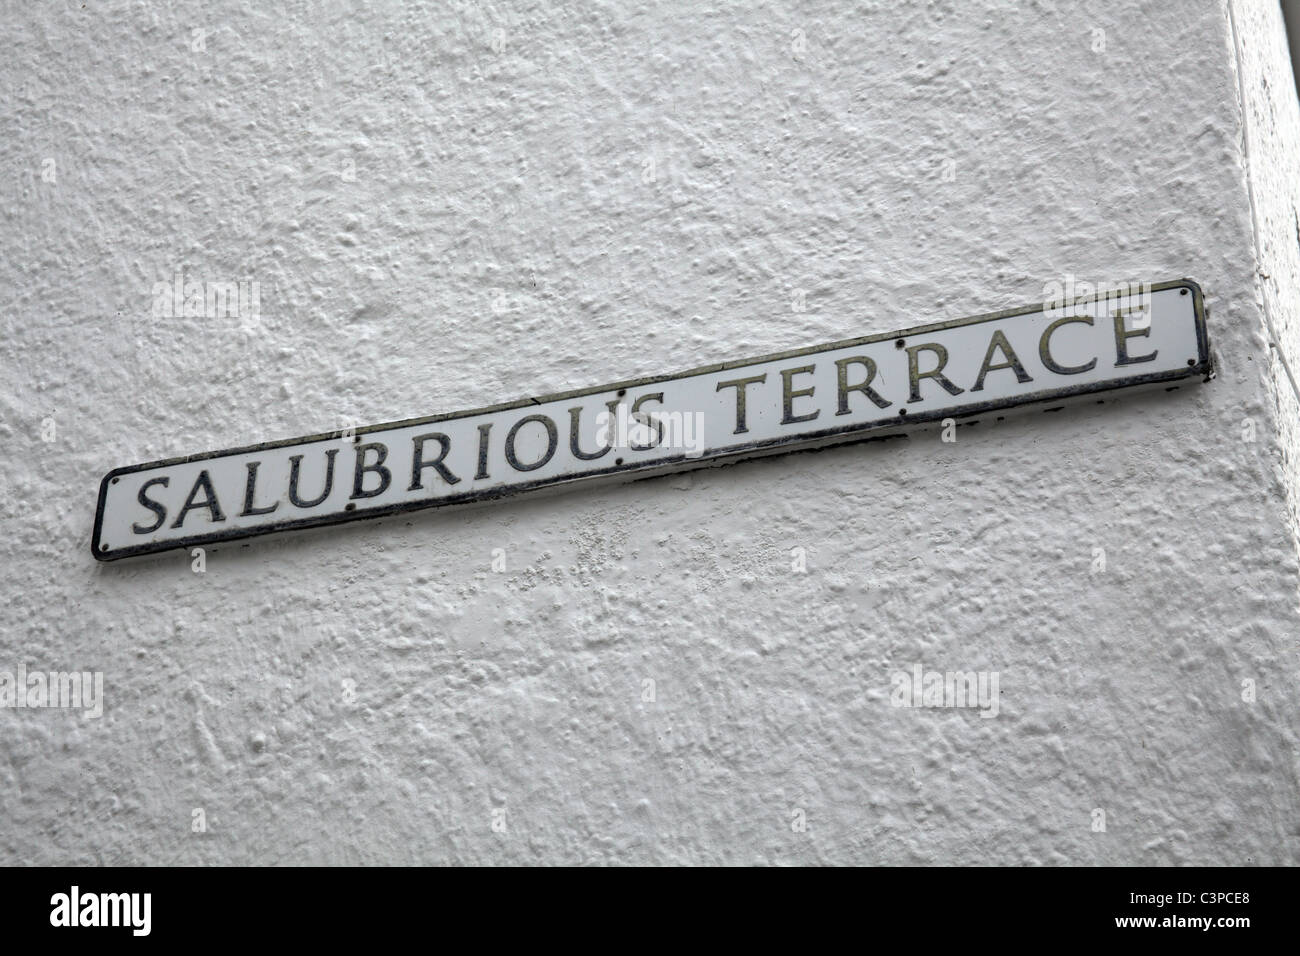 Quirky Road Name; Salubrious Terrace, St Ives, Cornwall Stock Photo